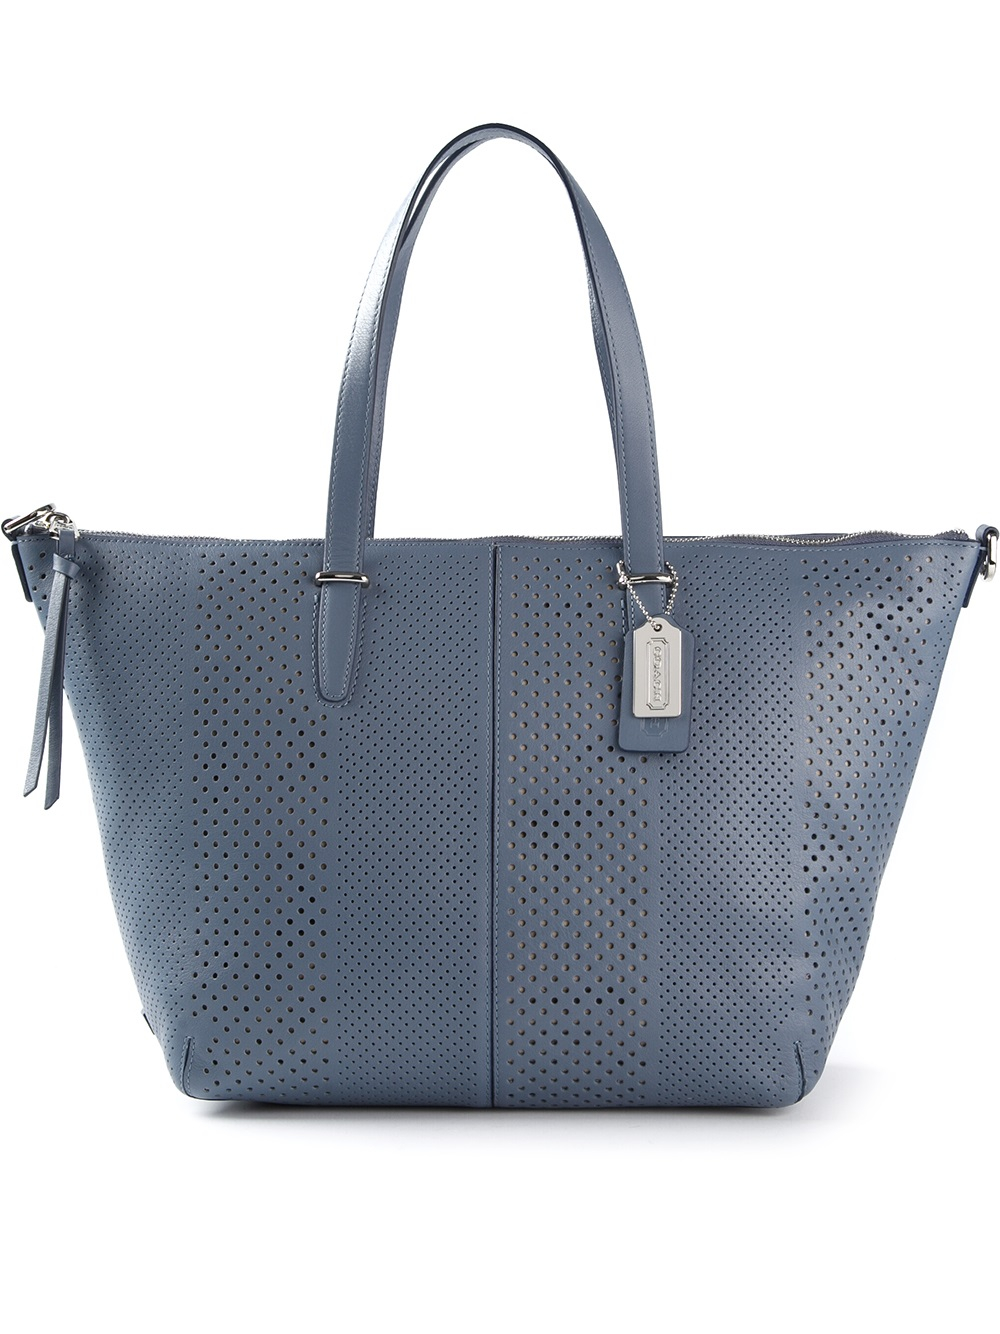 Coach Perforated Leather Tote in Gray (grey) | Lyst